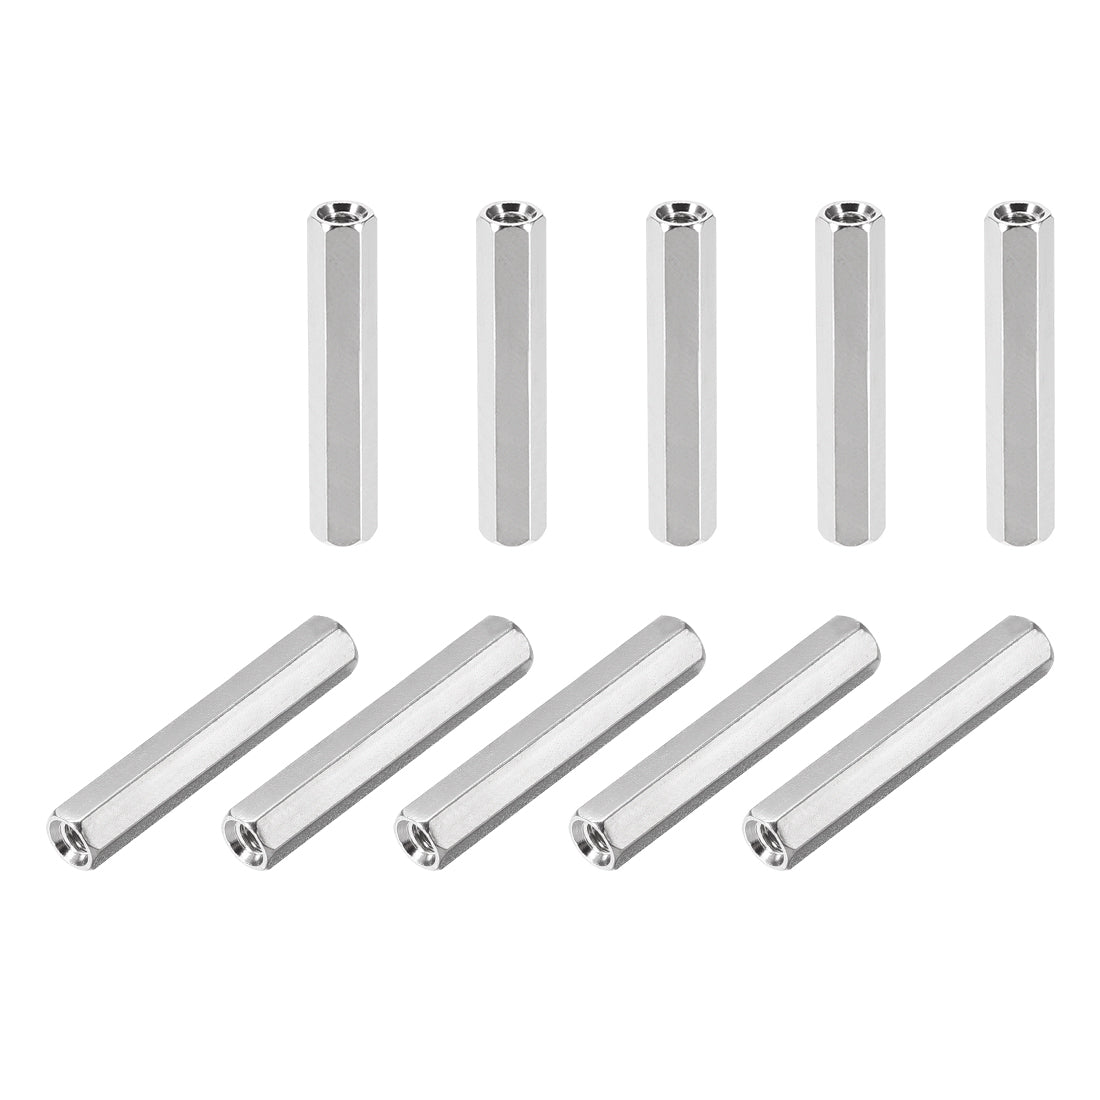 Uxcell Uxcell M3 x 45mm Female to Female Hex Nickel Plated Spacer Standoff 10pcs